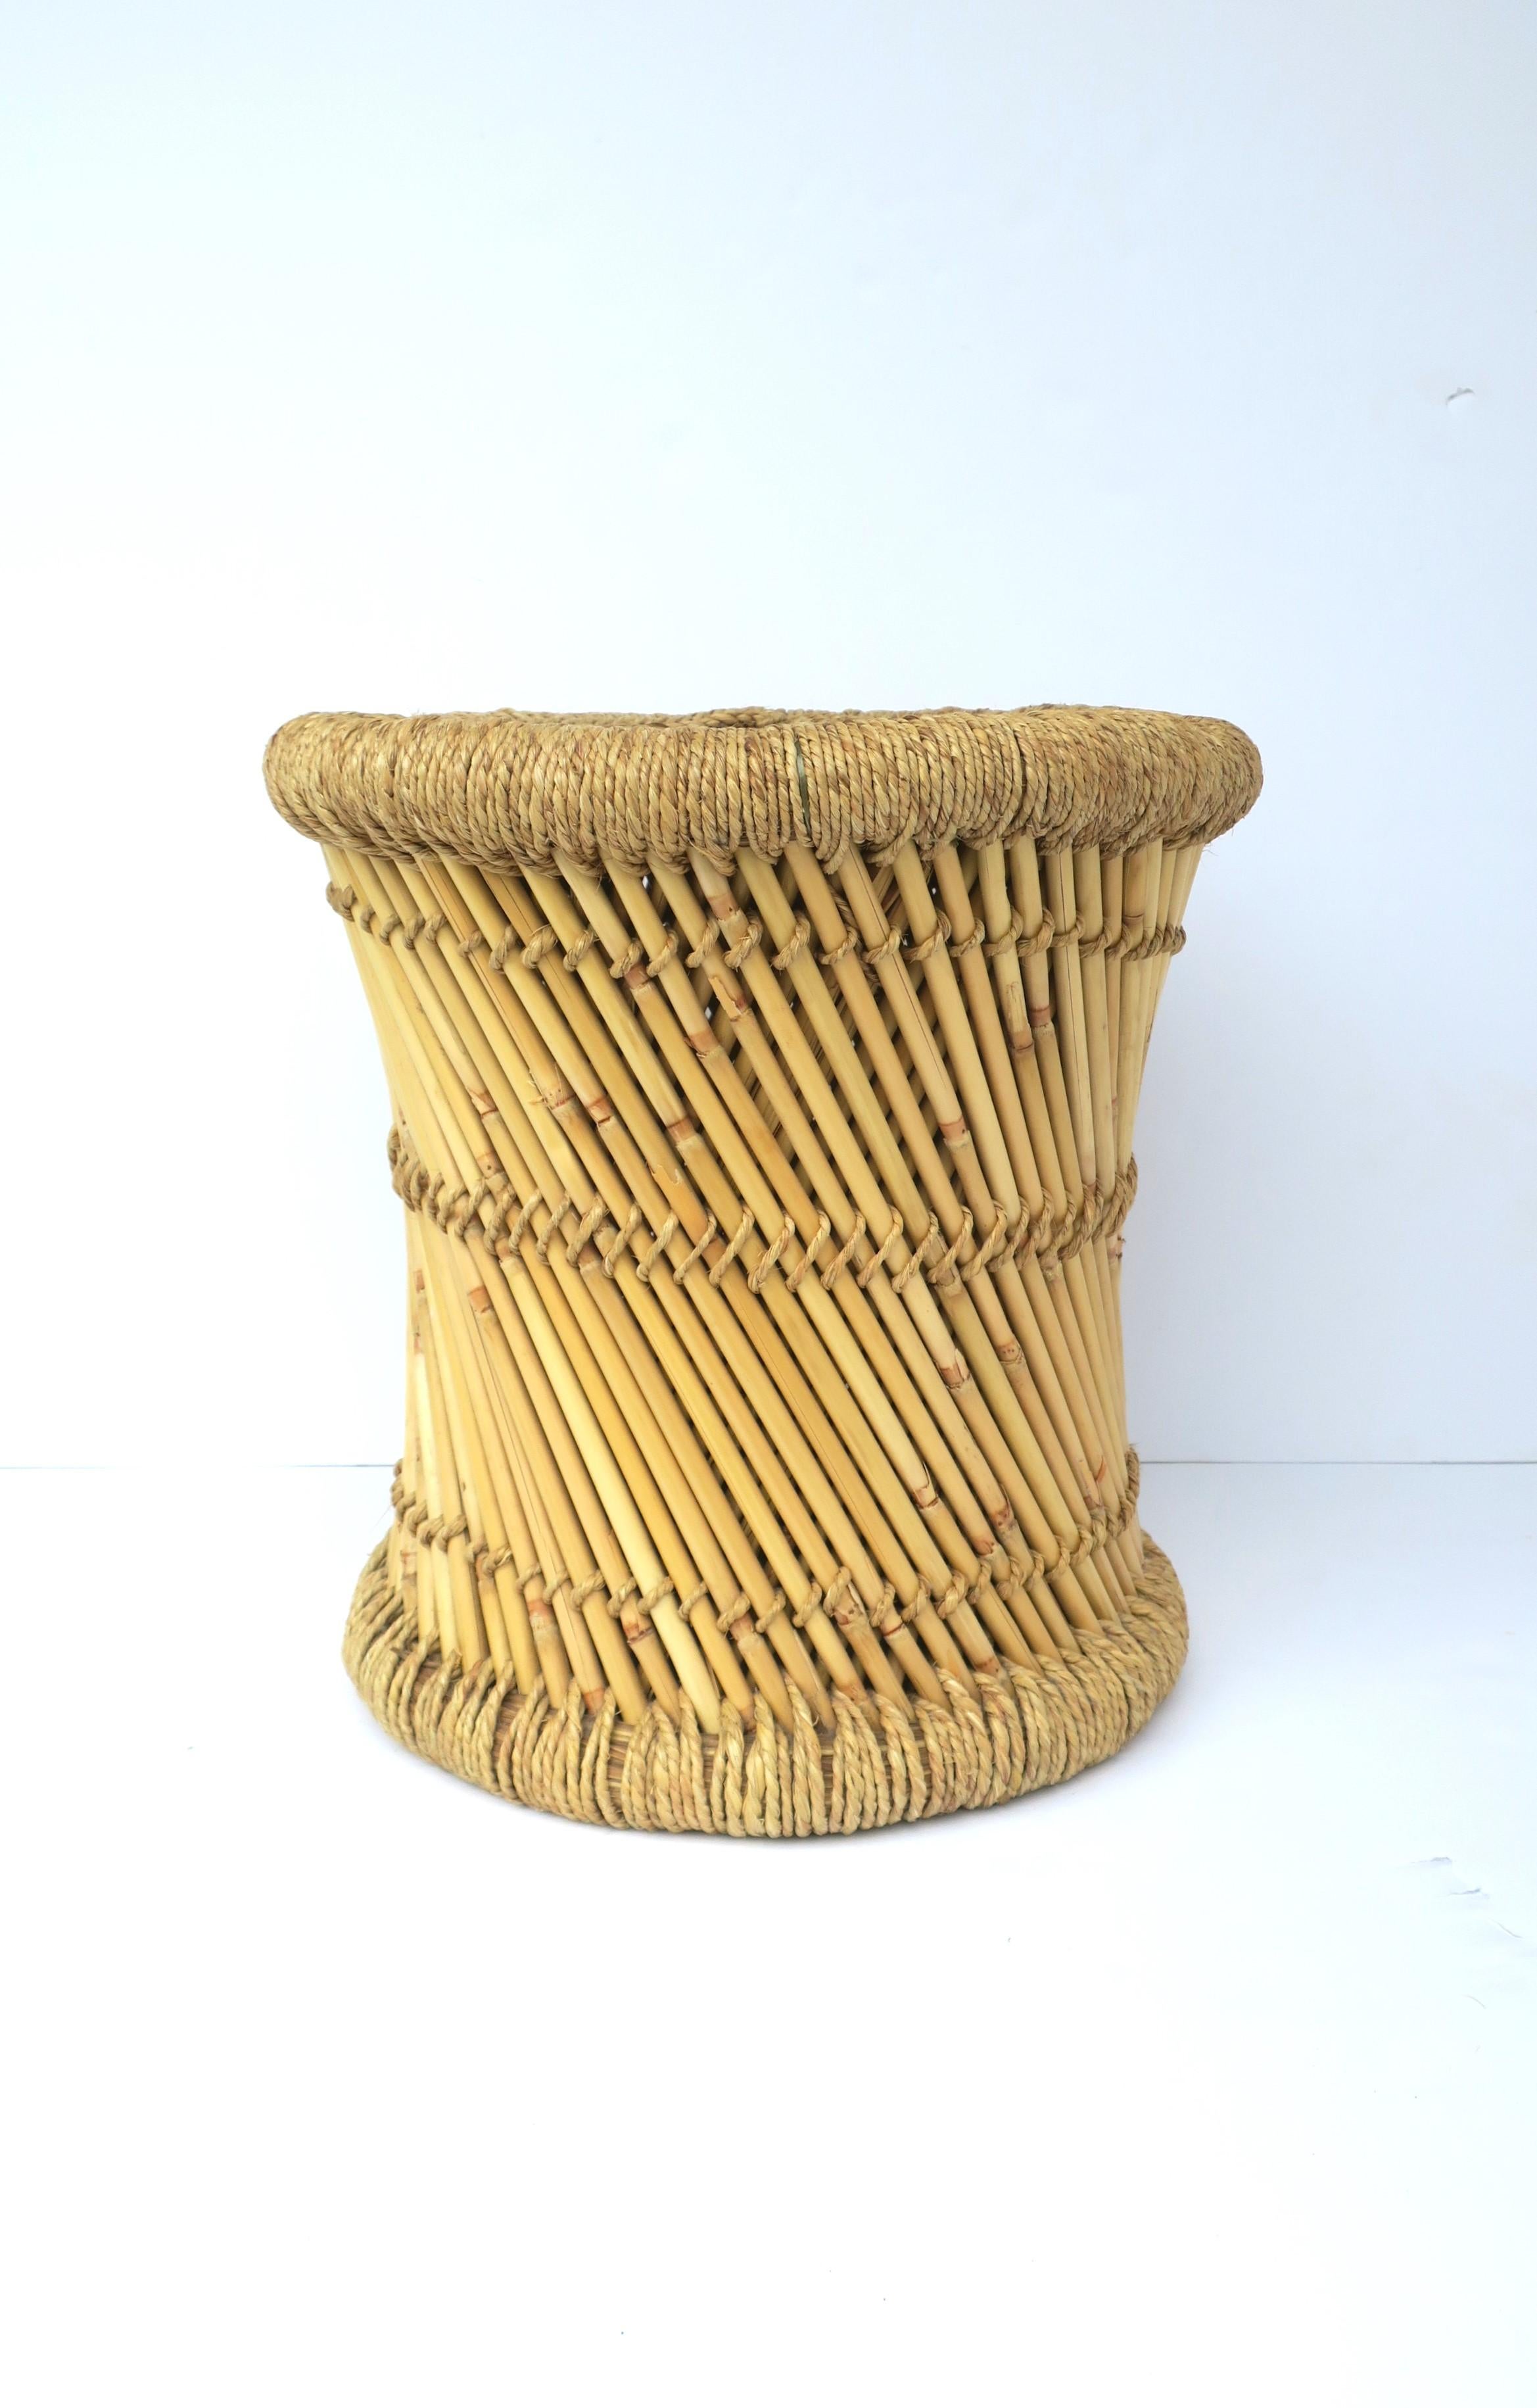 Anglo Raj Wicker Reed Stool or Pedestal Drink Table For Sale